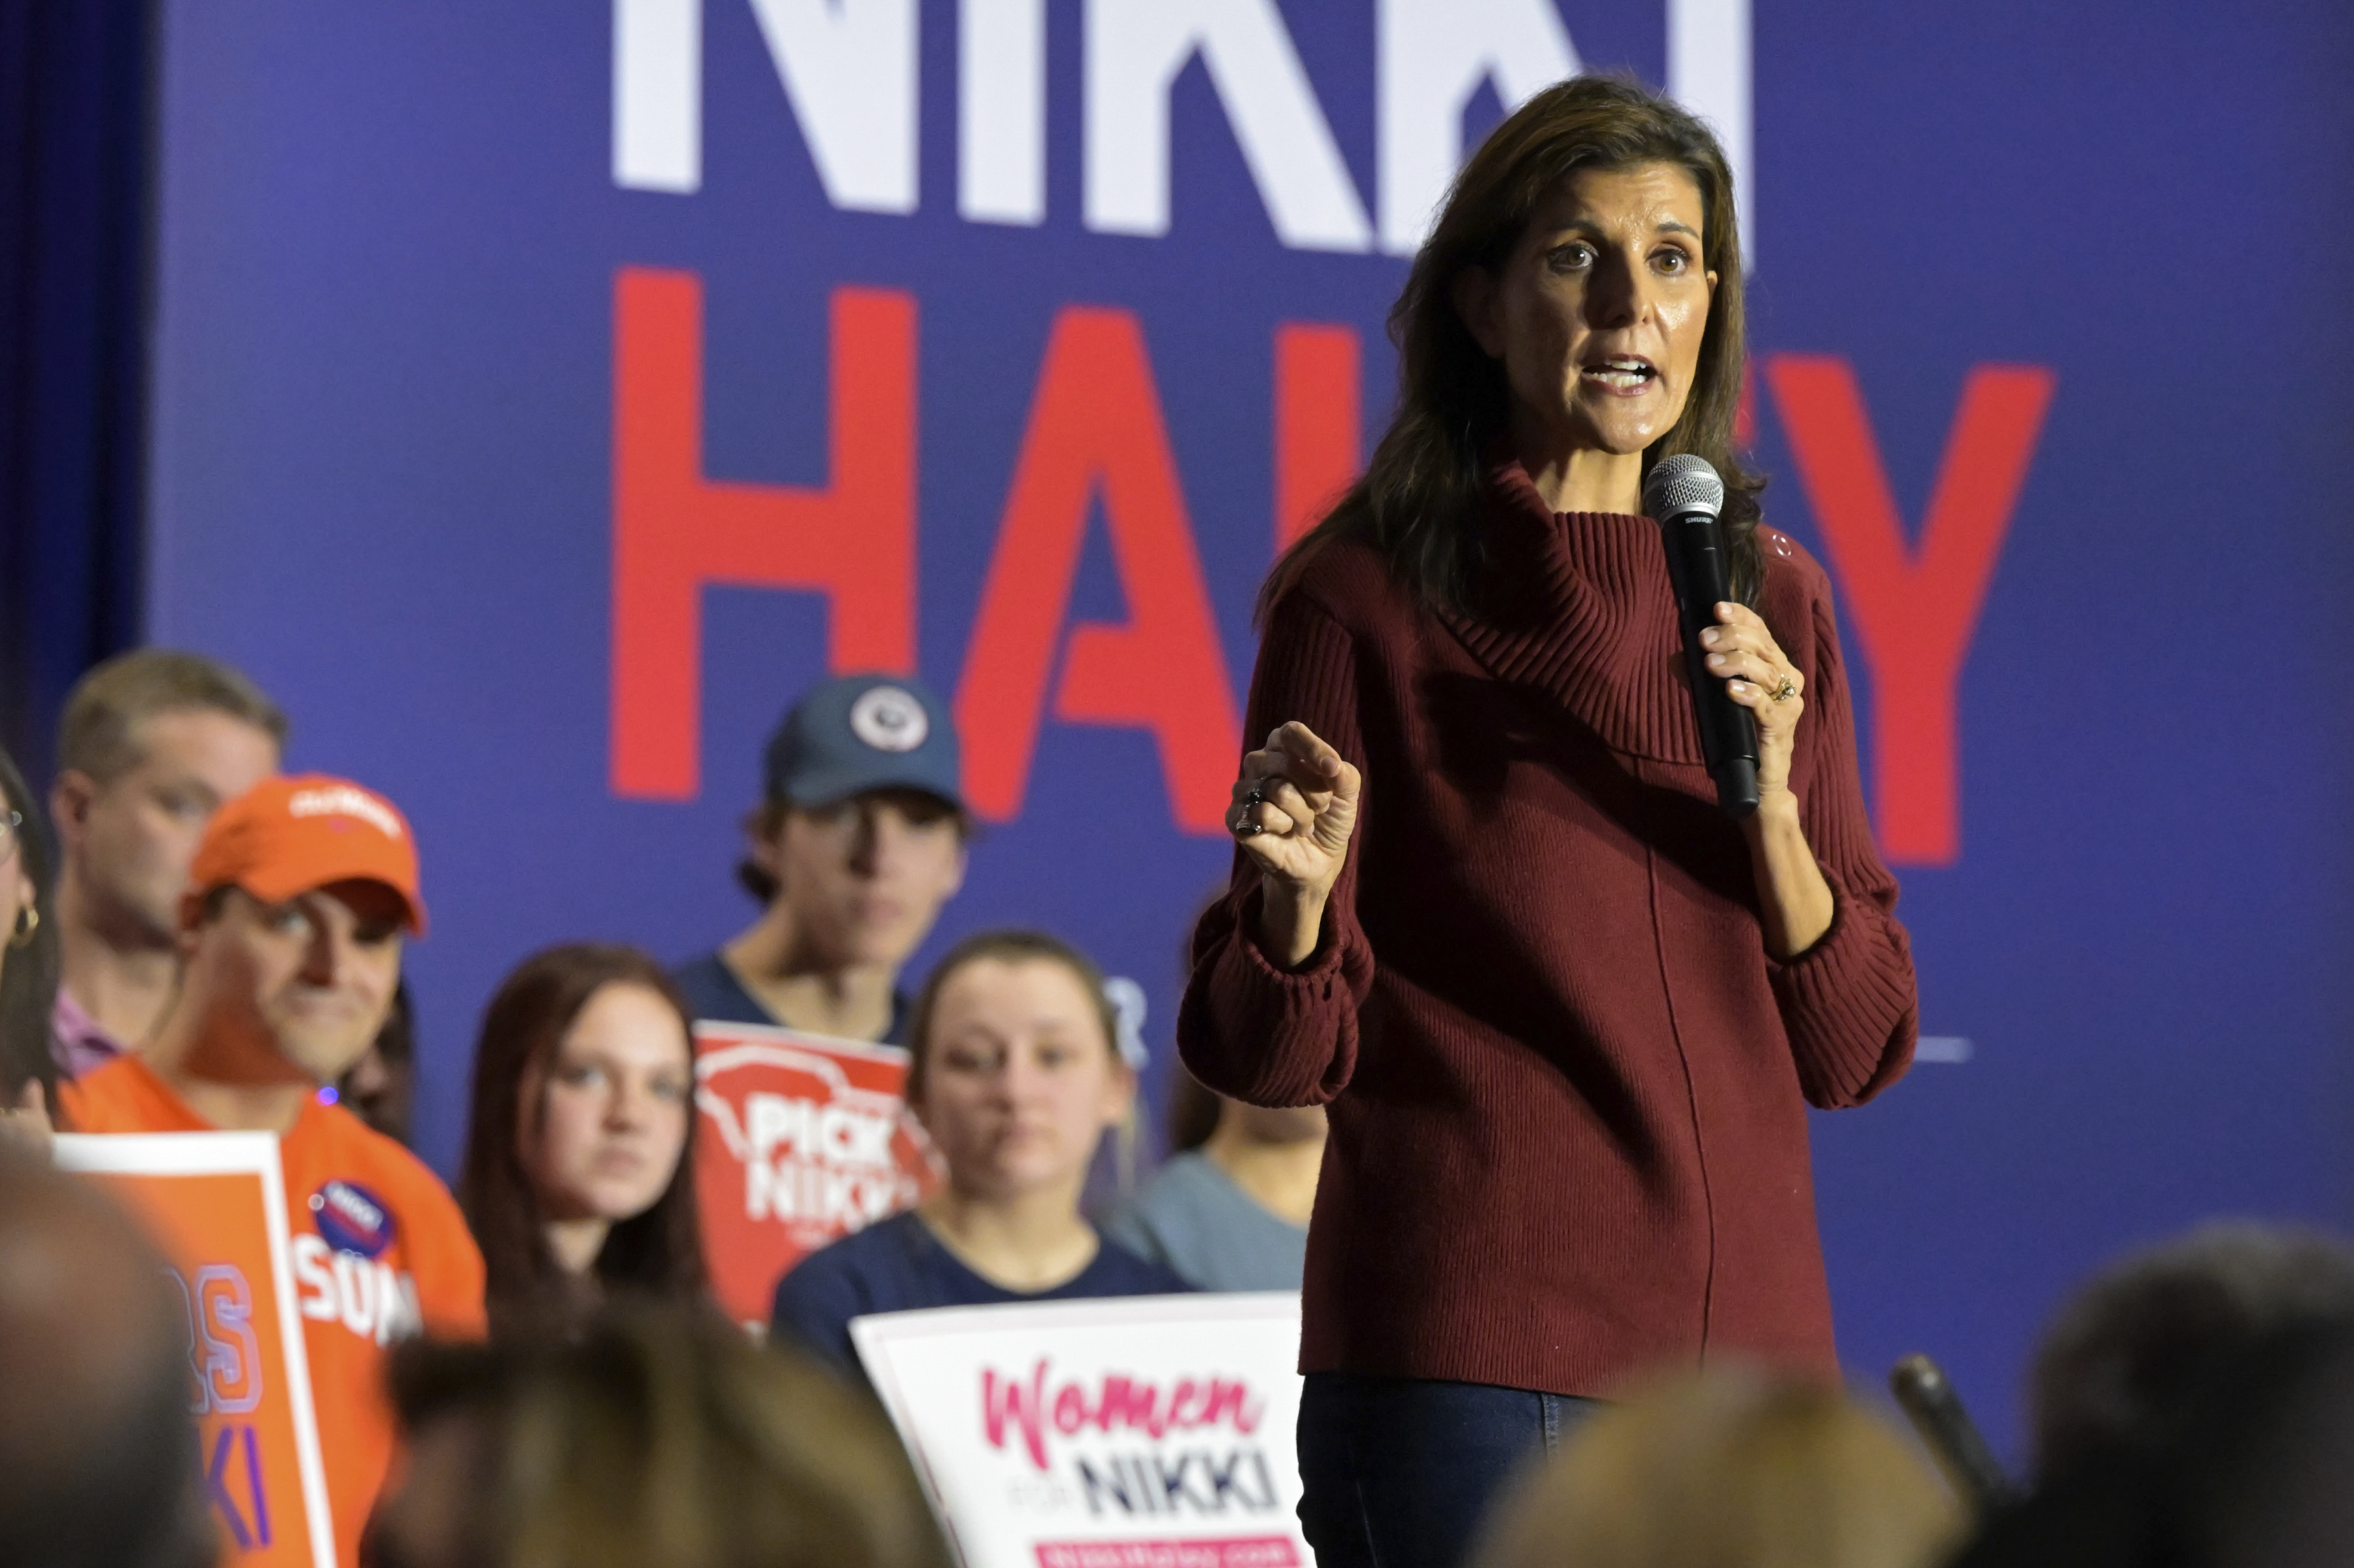 Nikki Haley has called out prejudice but rejected systemic racism throughout her career